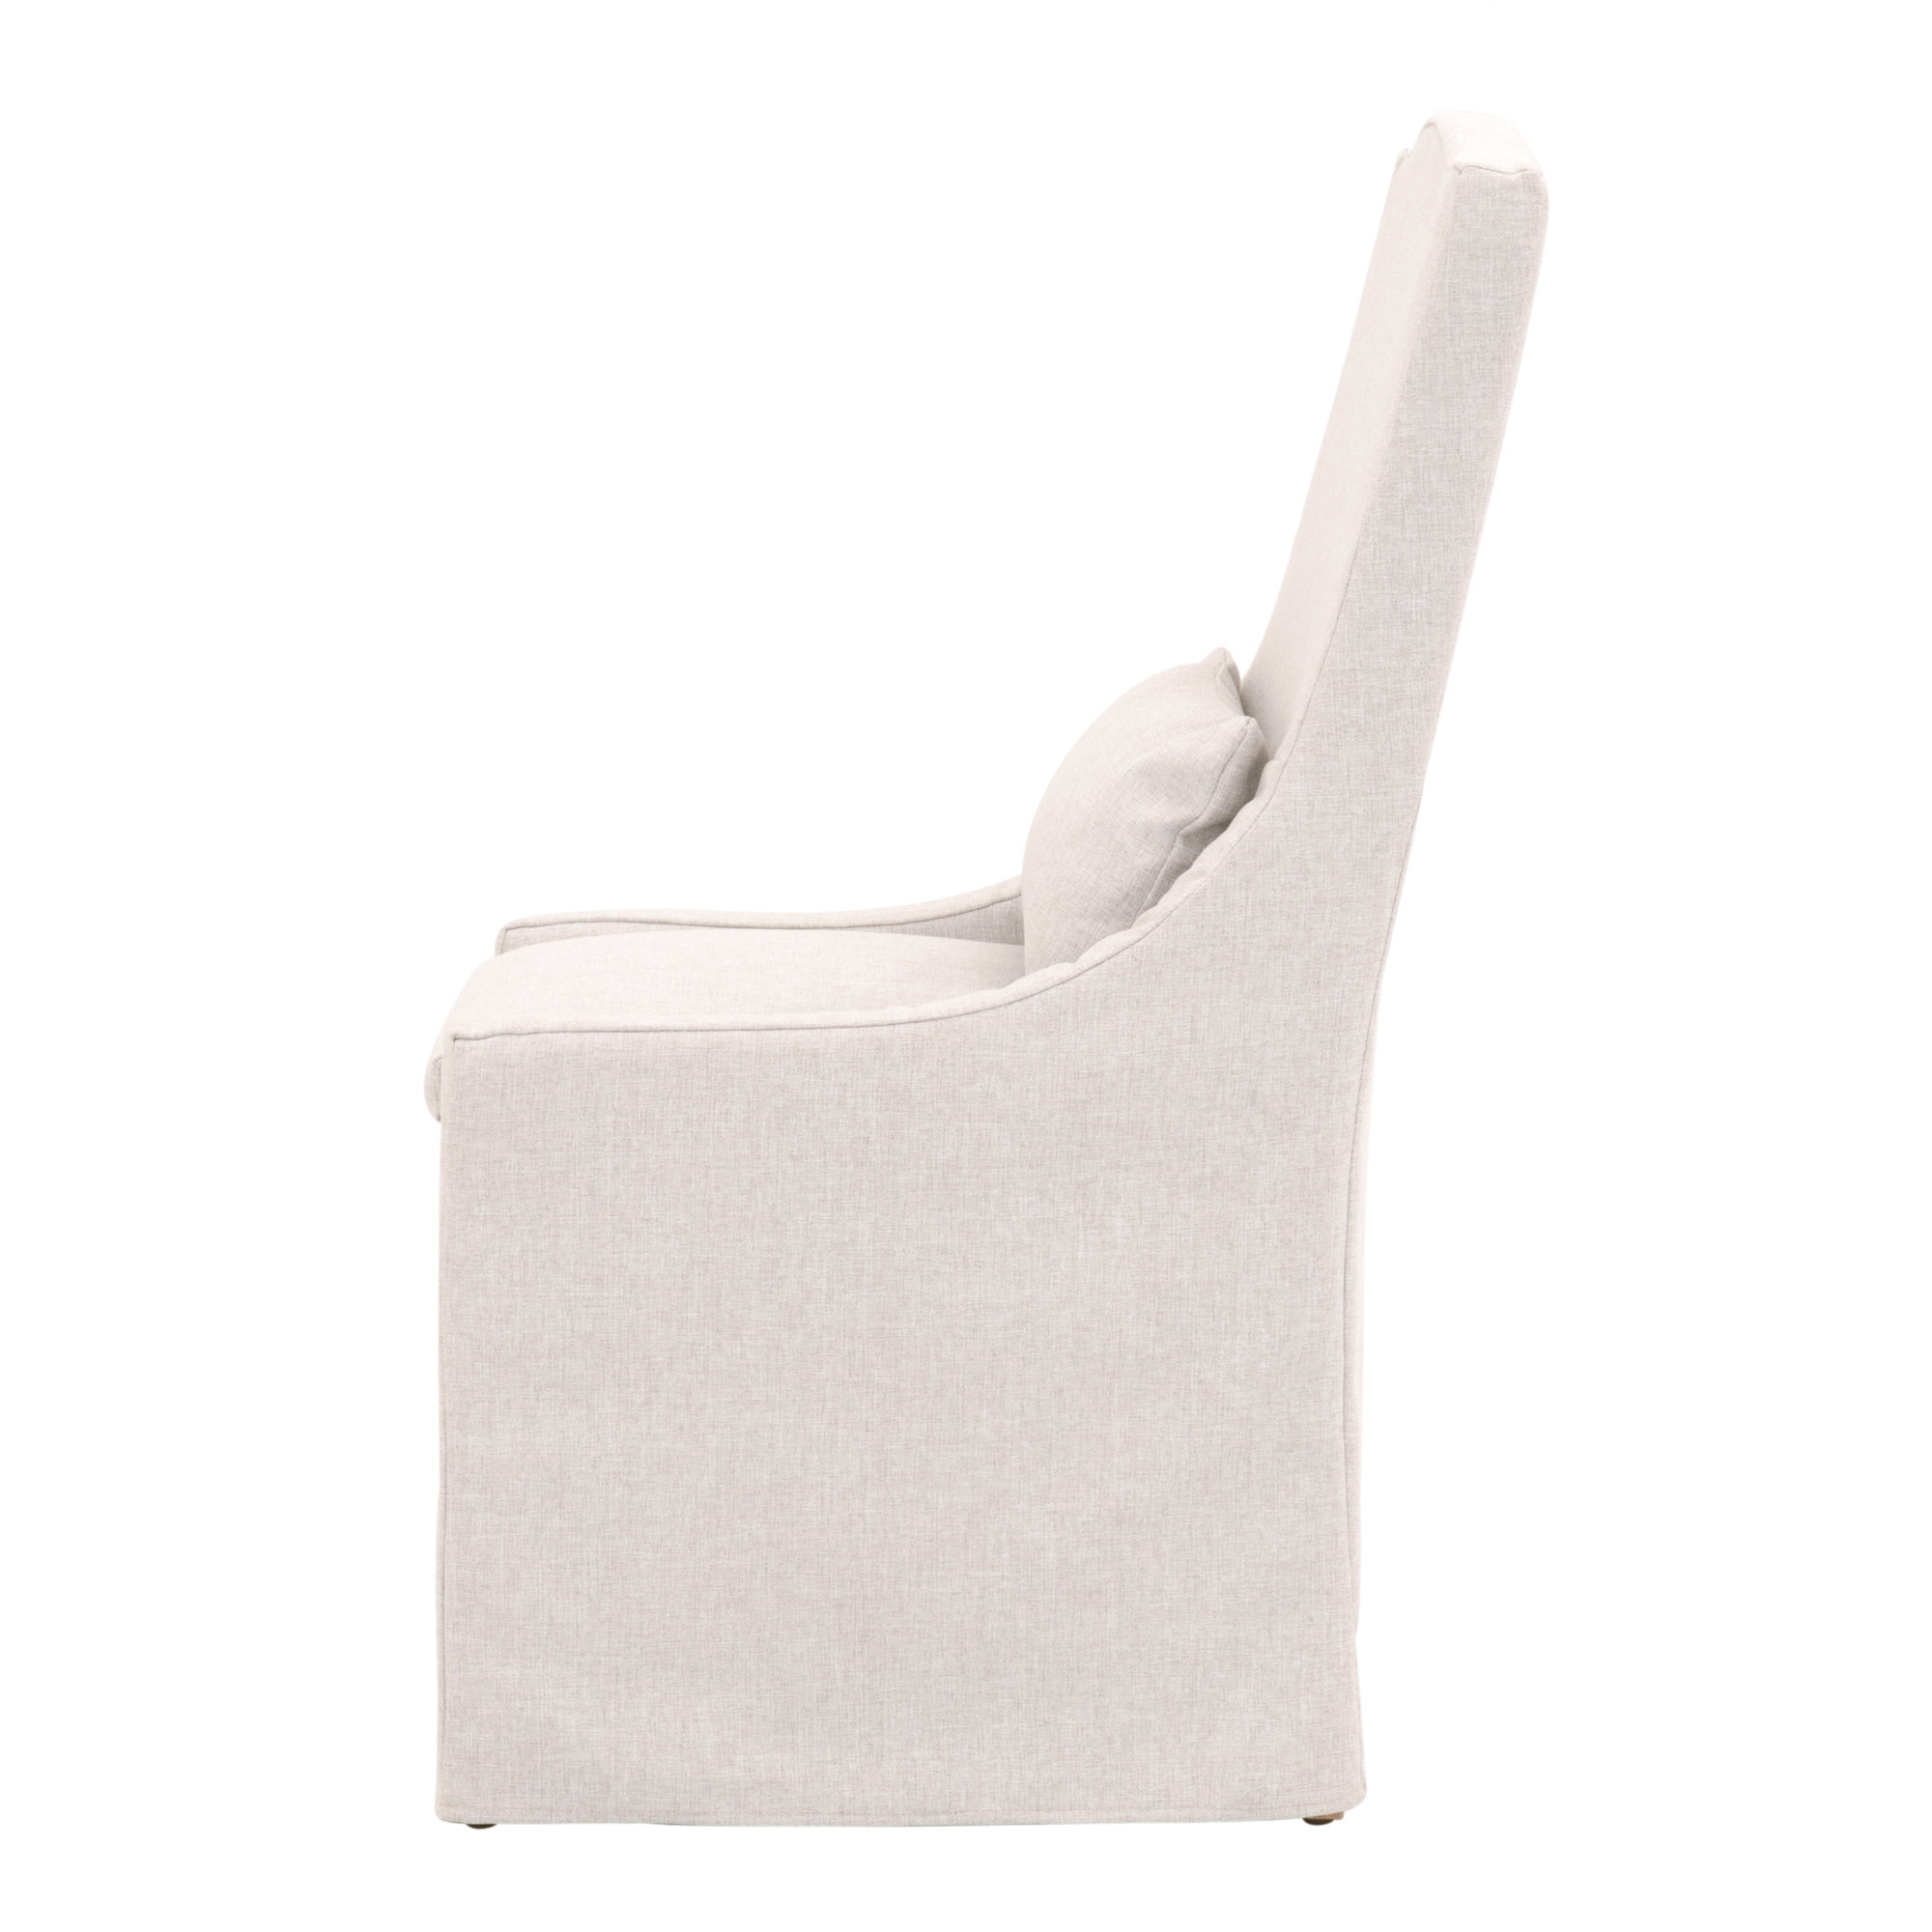 Odessa Outdoor Slipcover Dining Chair, White - Image 2